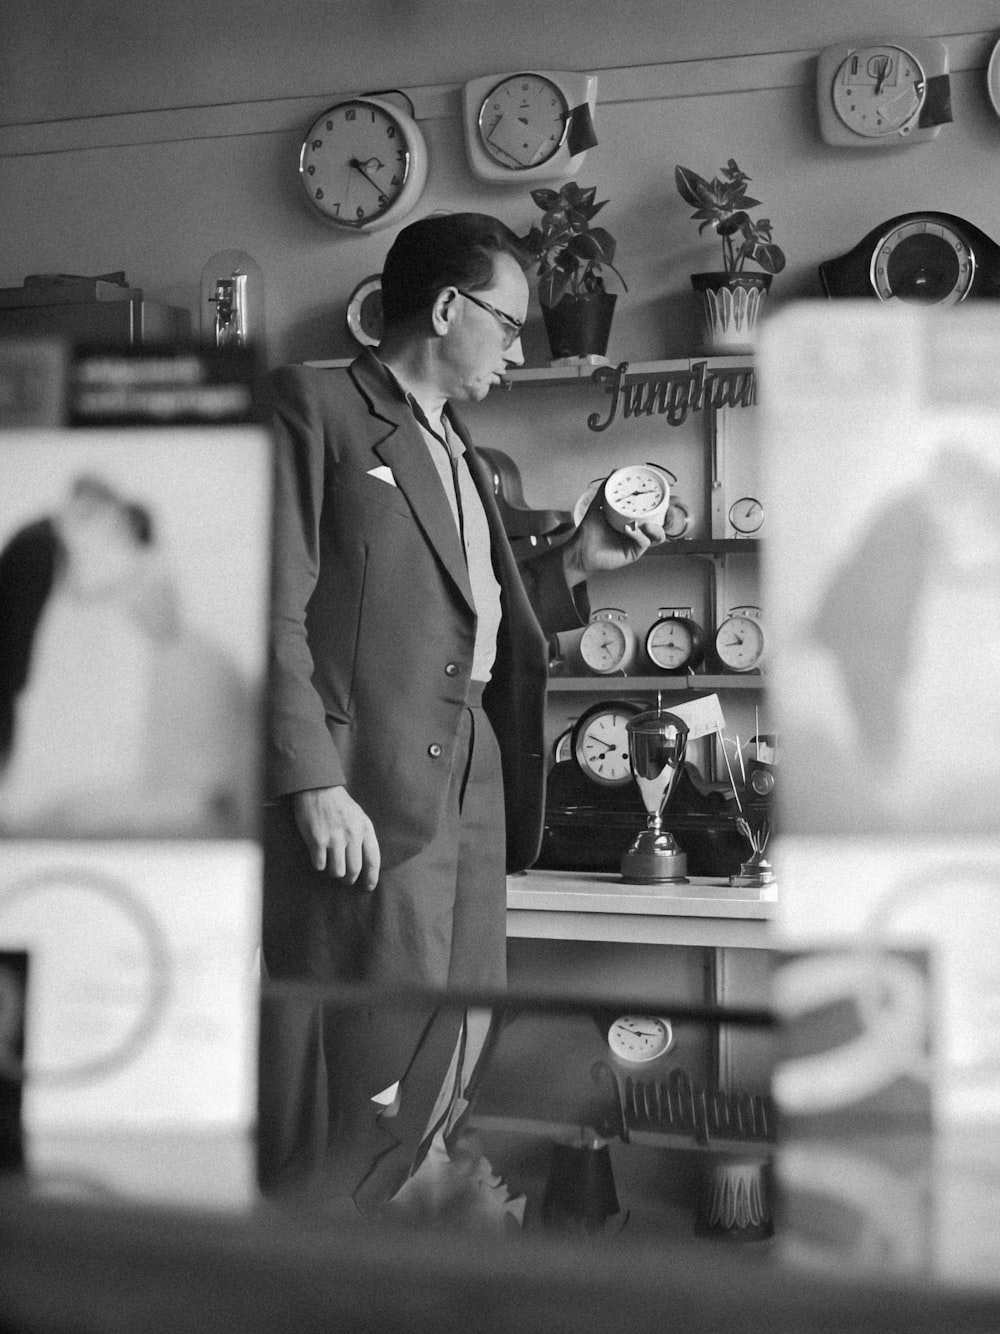 a man in a suit standing in a room with clocks on the wall